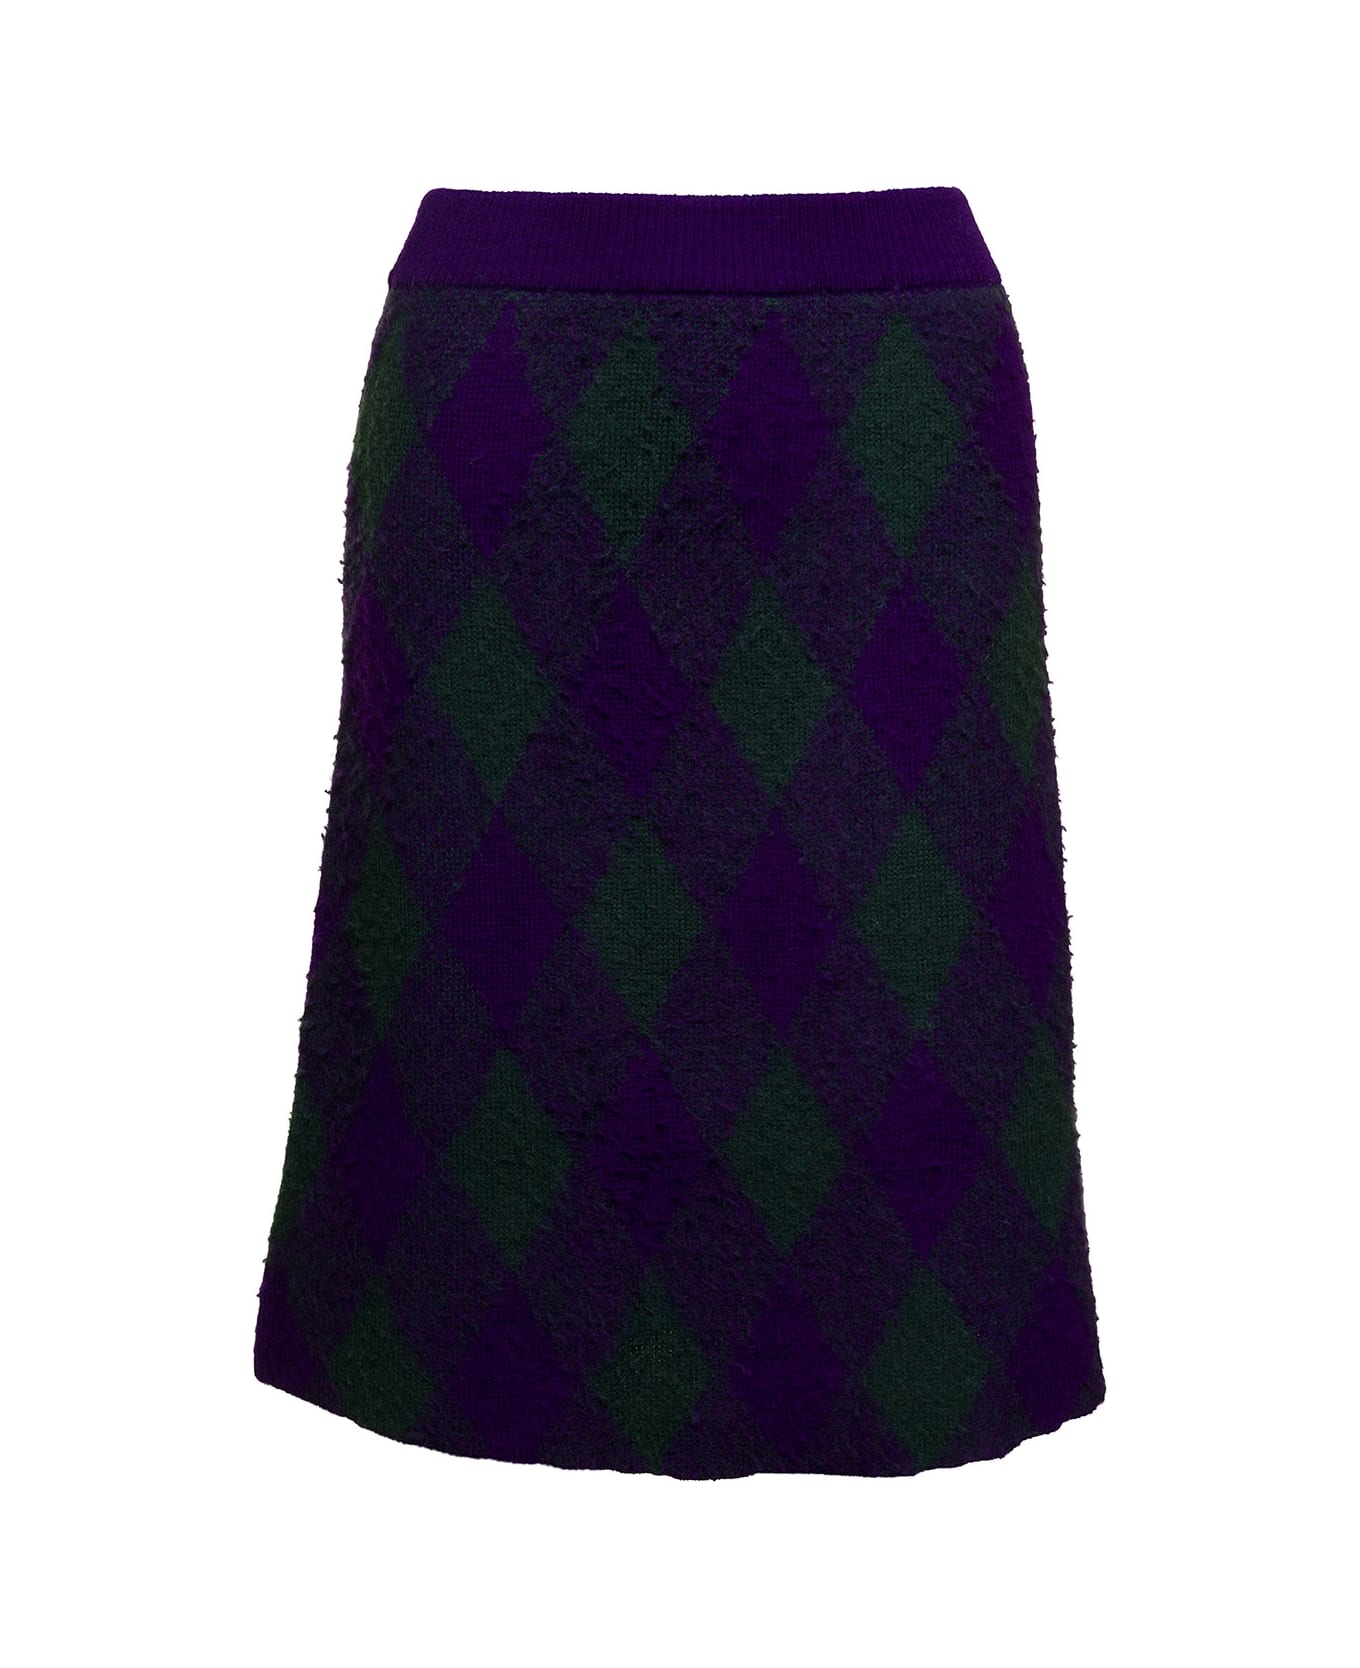 Burberry Midi Purple Skirt With Argyle Print In Wool Woman - Violet